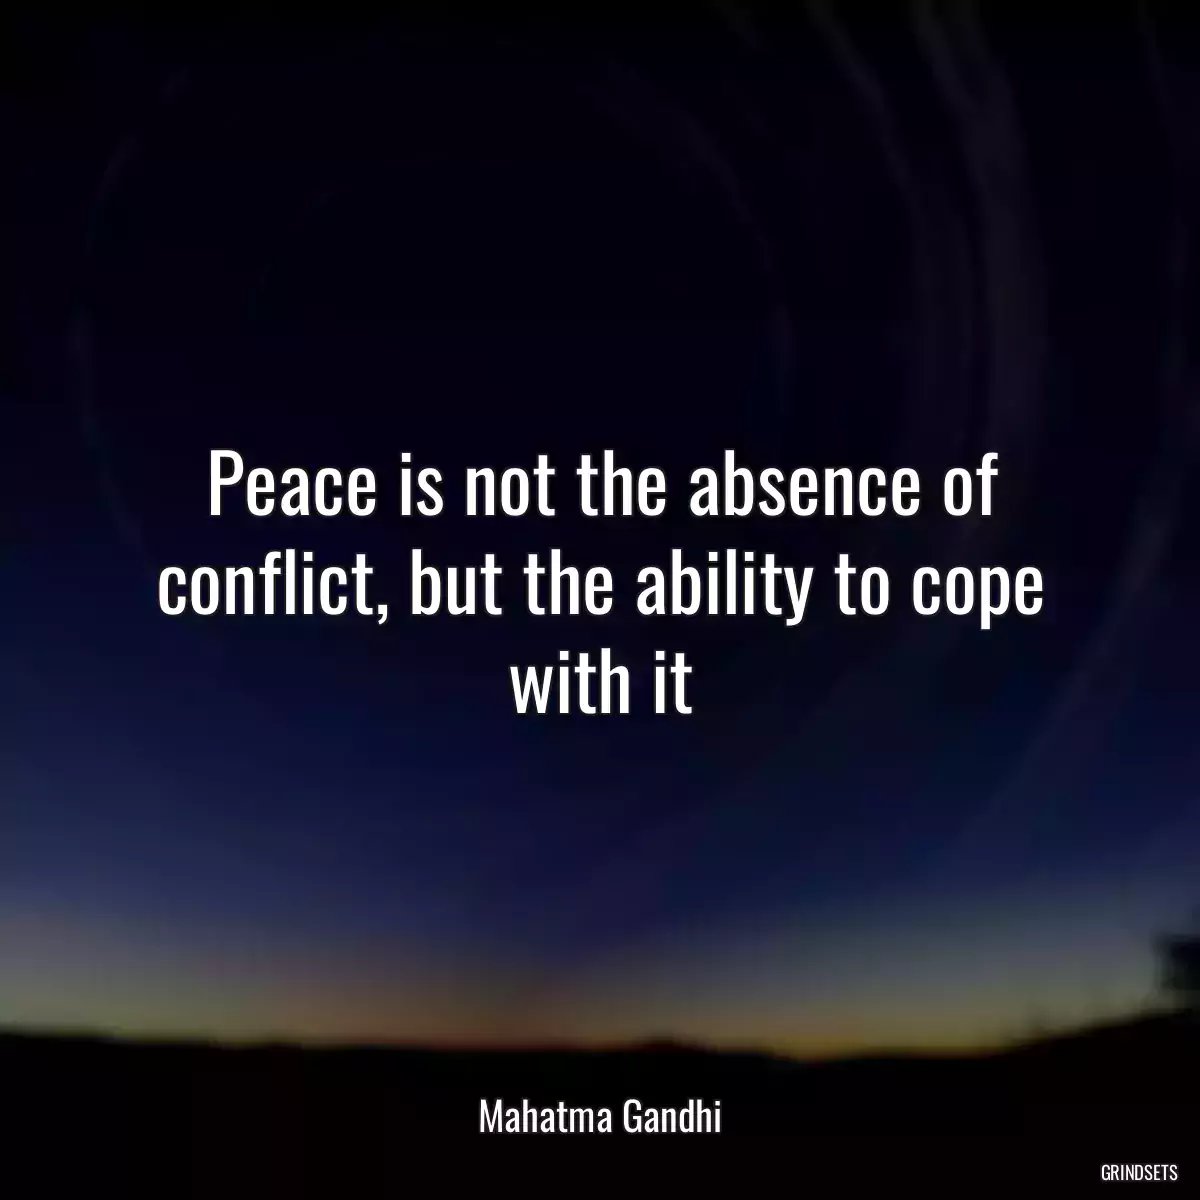 Peace is not the absence of conflict, but the ability to cope with it